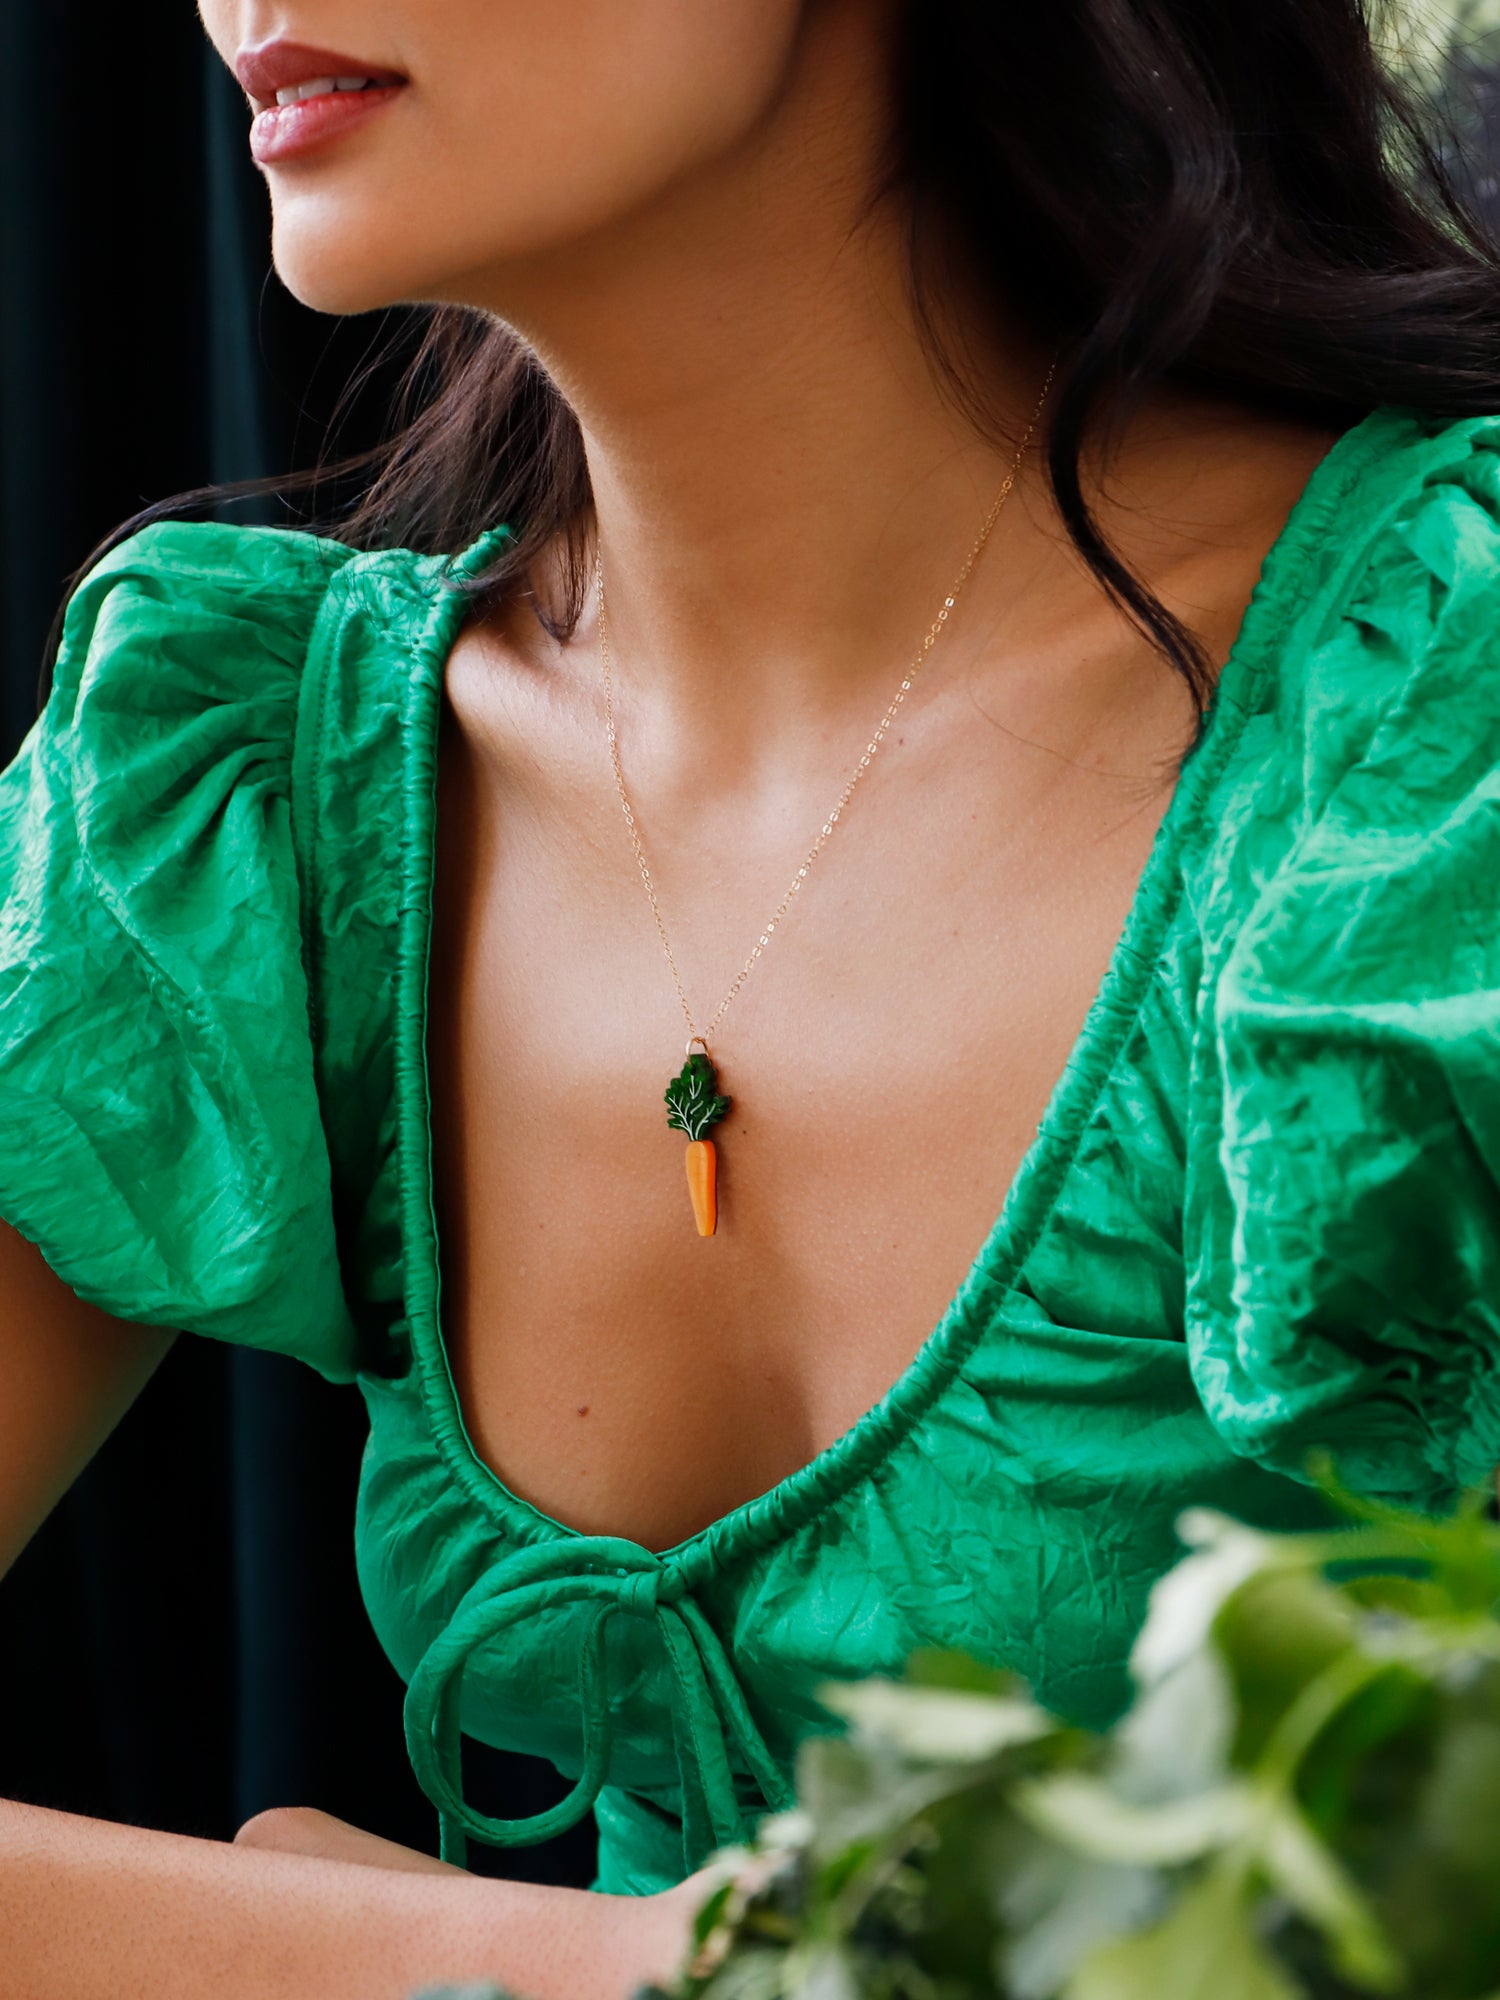 Green and orange hand-inked acrylic mini carrot pendant with optional gold-filled chain. Handmade in London by Wolf & Moon.